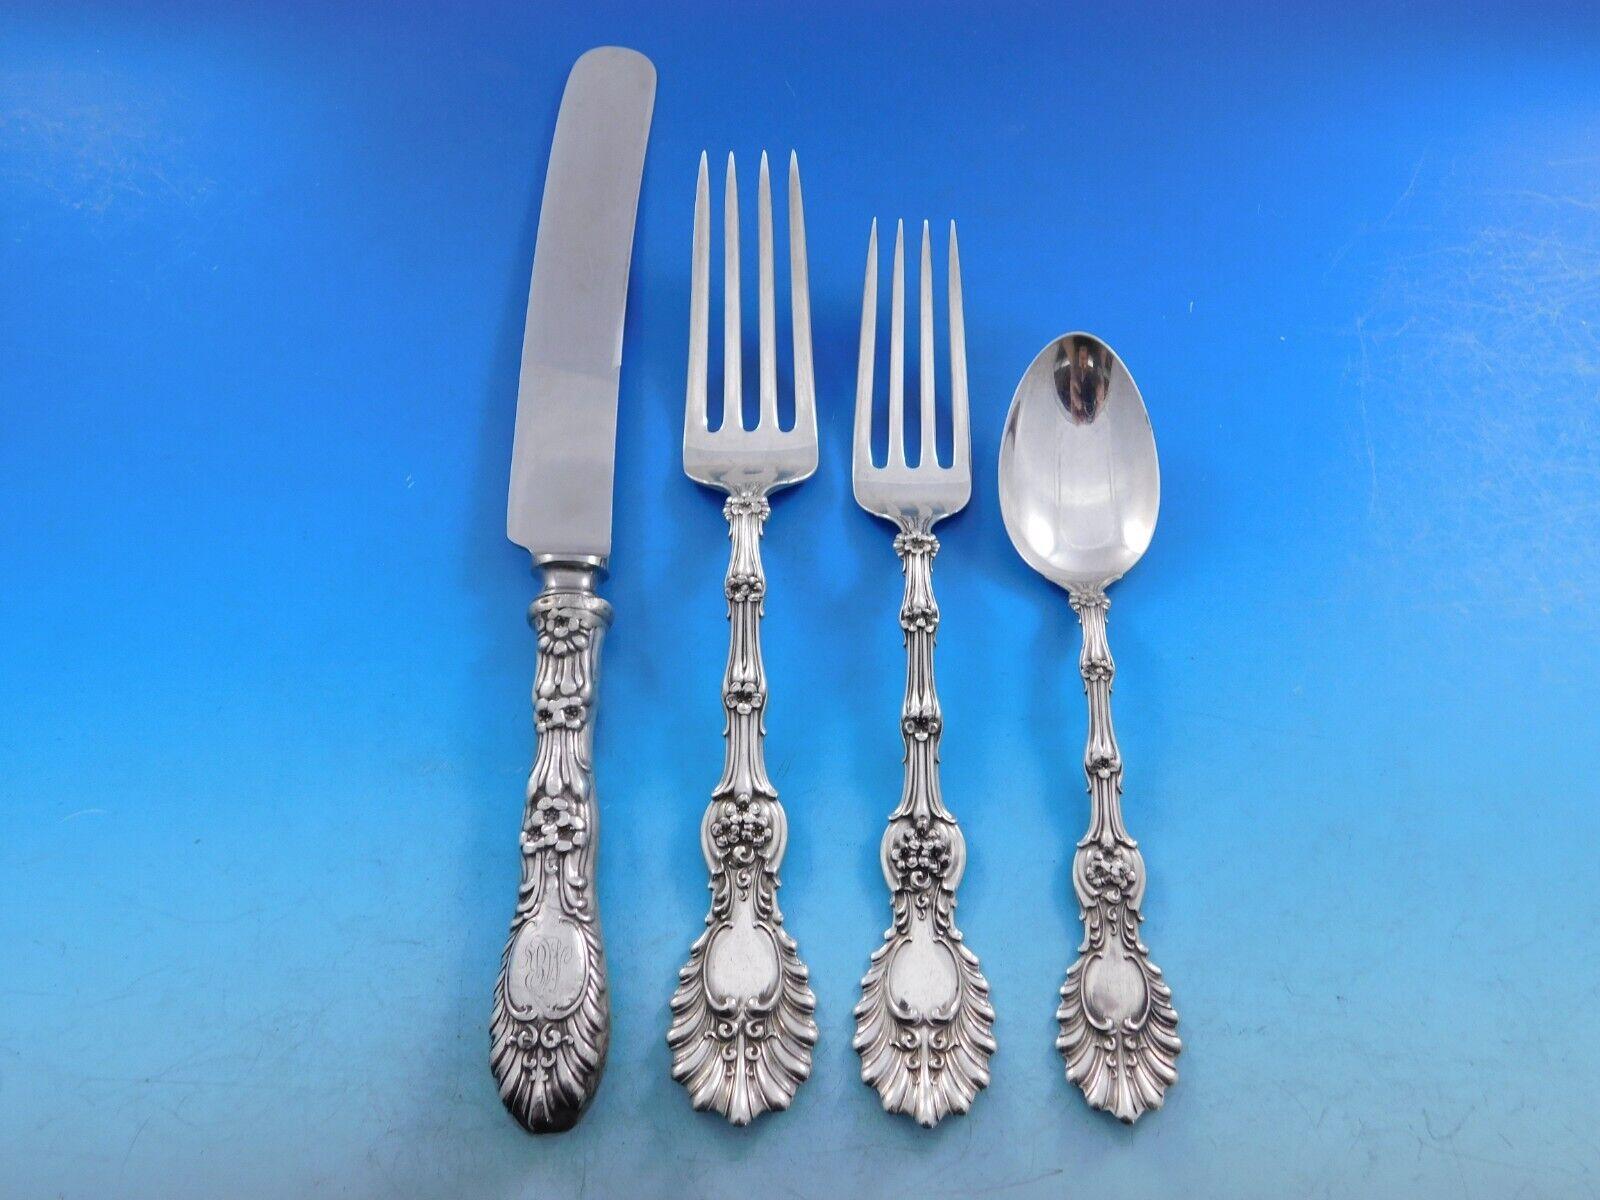 Scarce Radiant by Whiting Sterling Silver Flatware set - 53 pieces. This set includes:

8 Regular Knives, with replaced stainless blades, 8 3/8